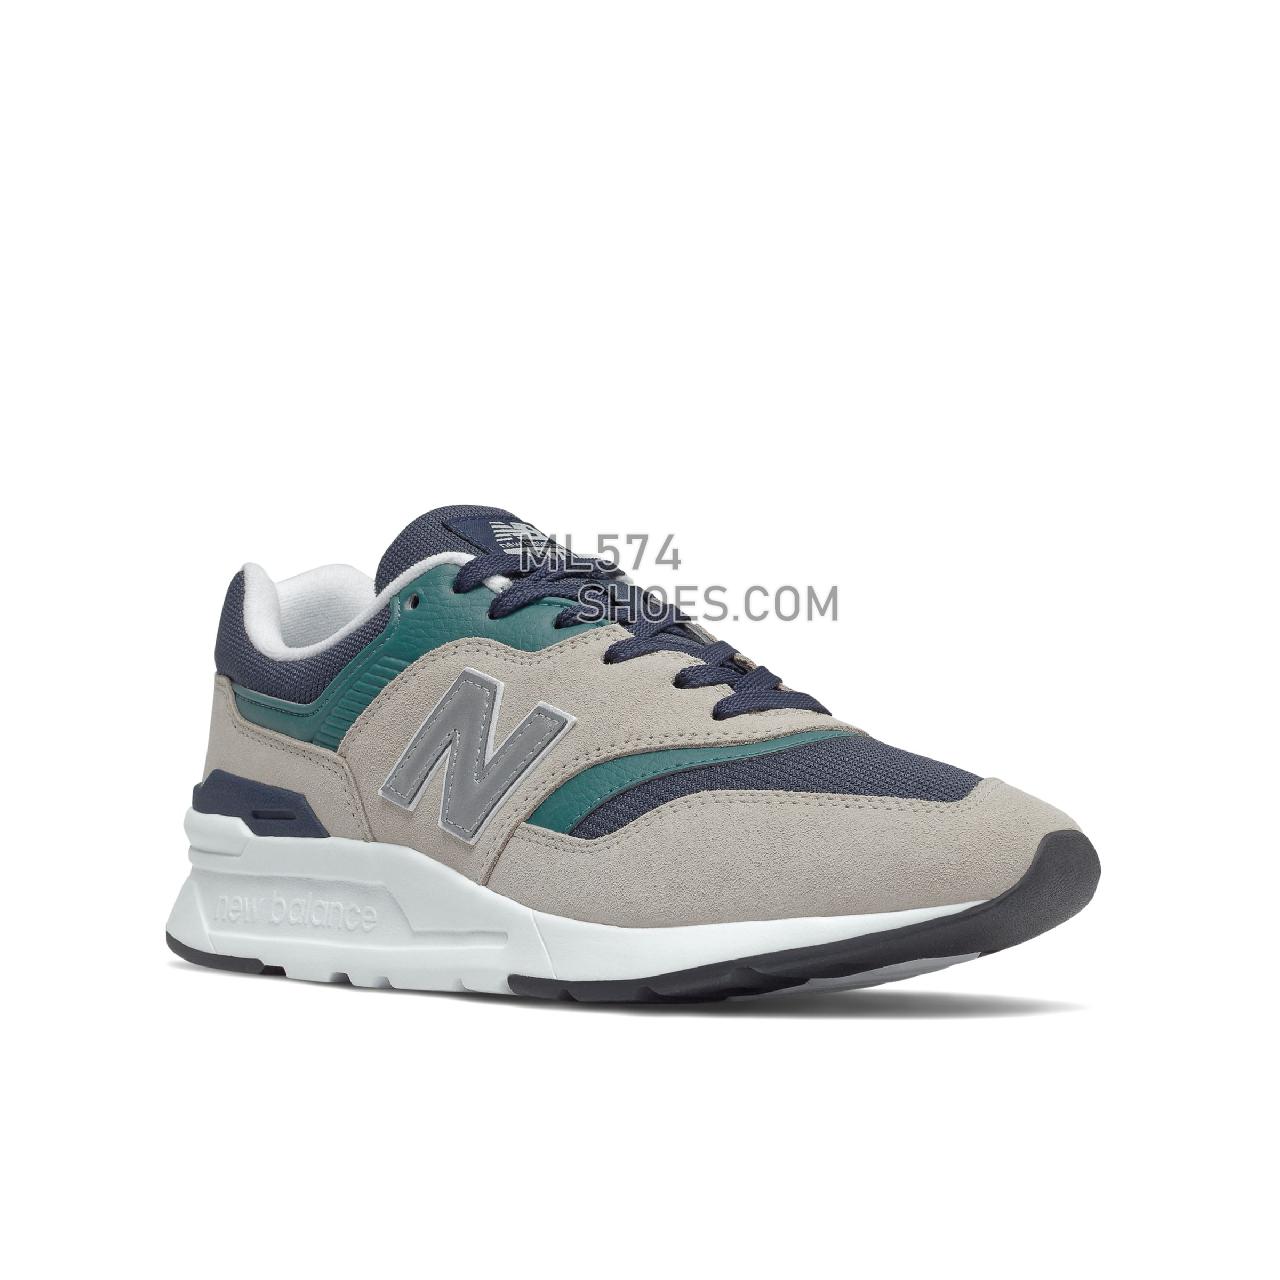 New Balance 997H - Men's Sport Style Sneakers - Timberwolf with White - CM997HTB